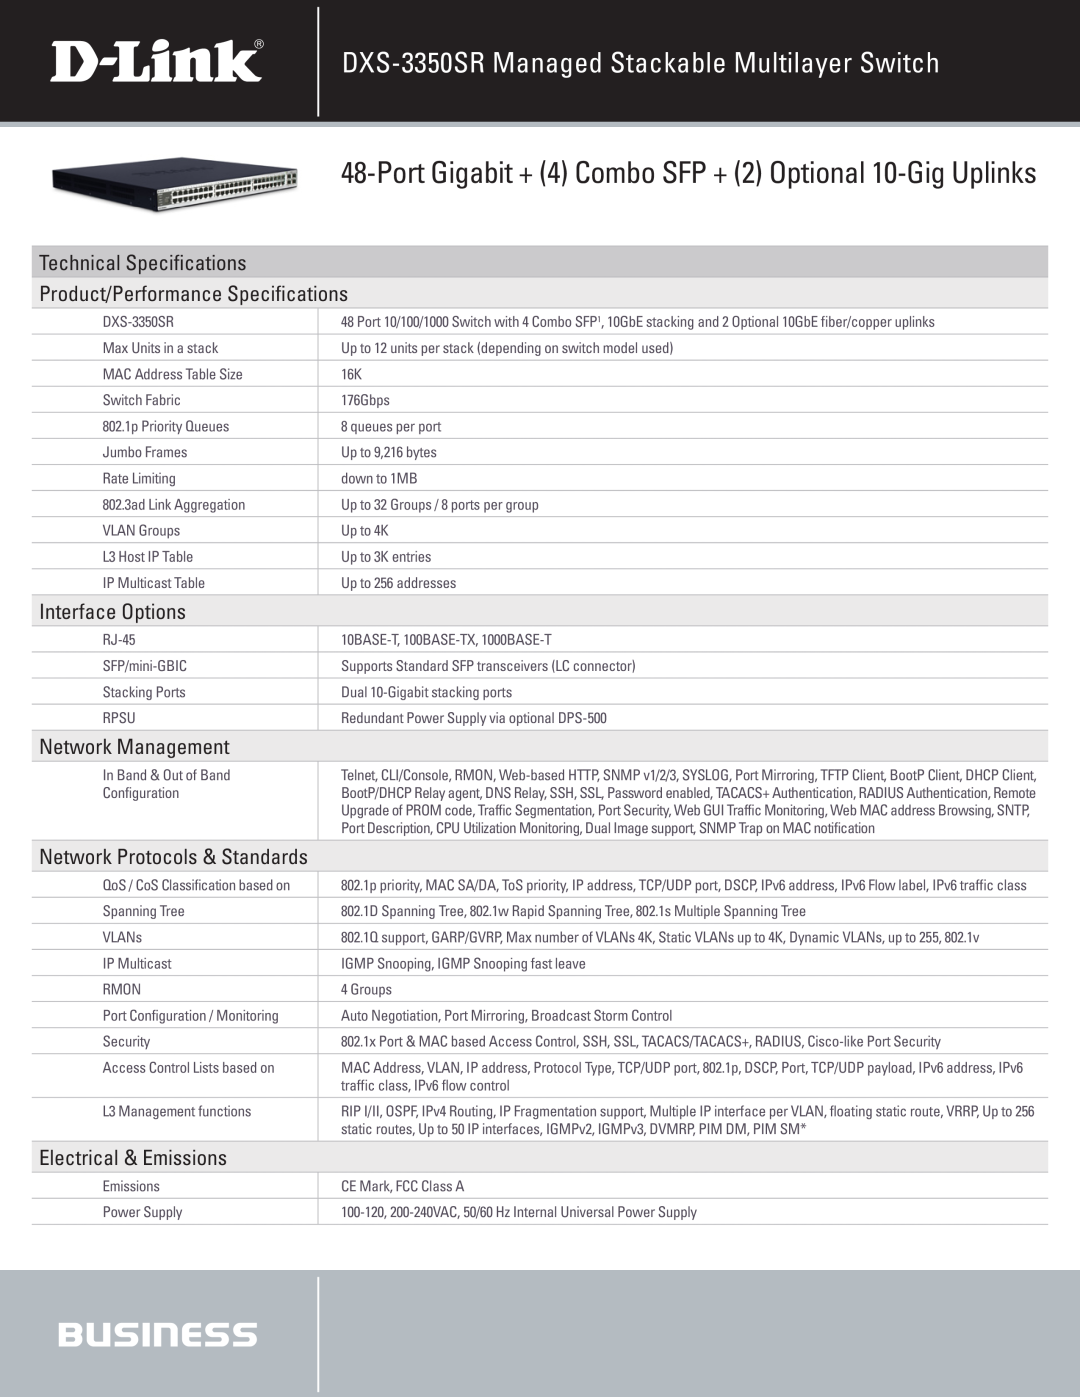 D-Link DXS-3350SR manual Technical Specifications Product/Performance Specifications, Interface Options, Network Management 